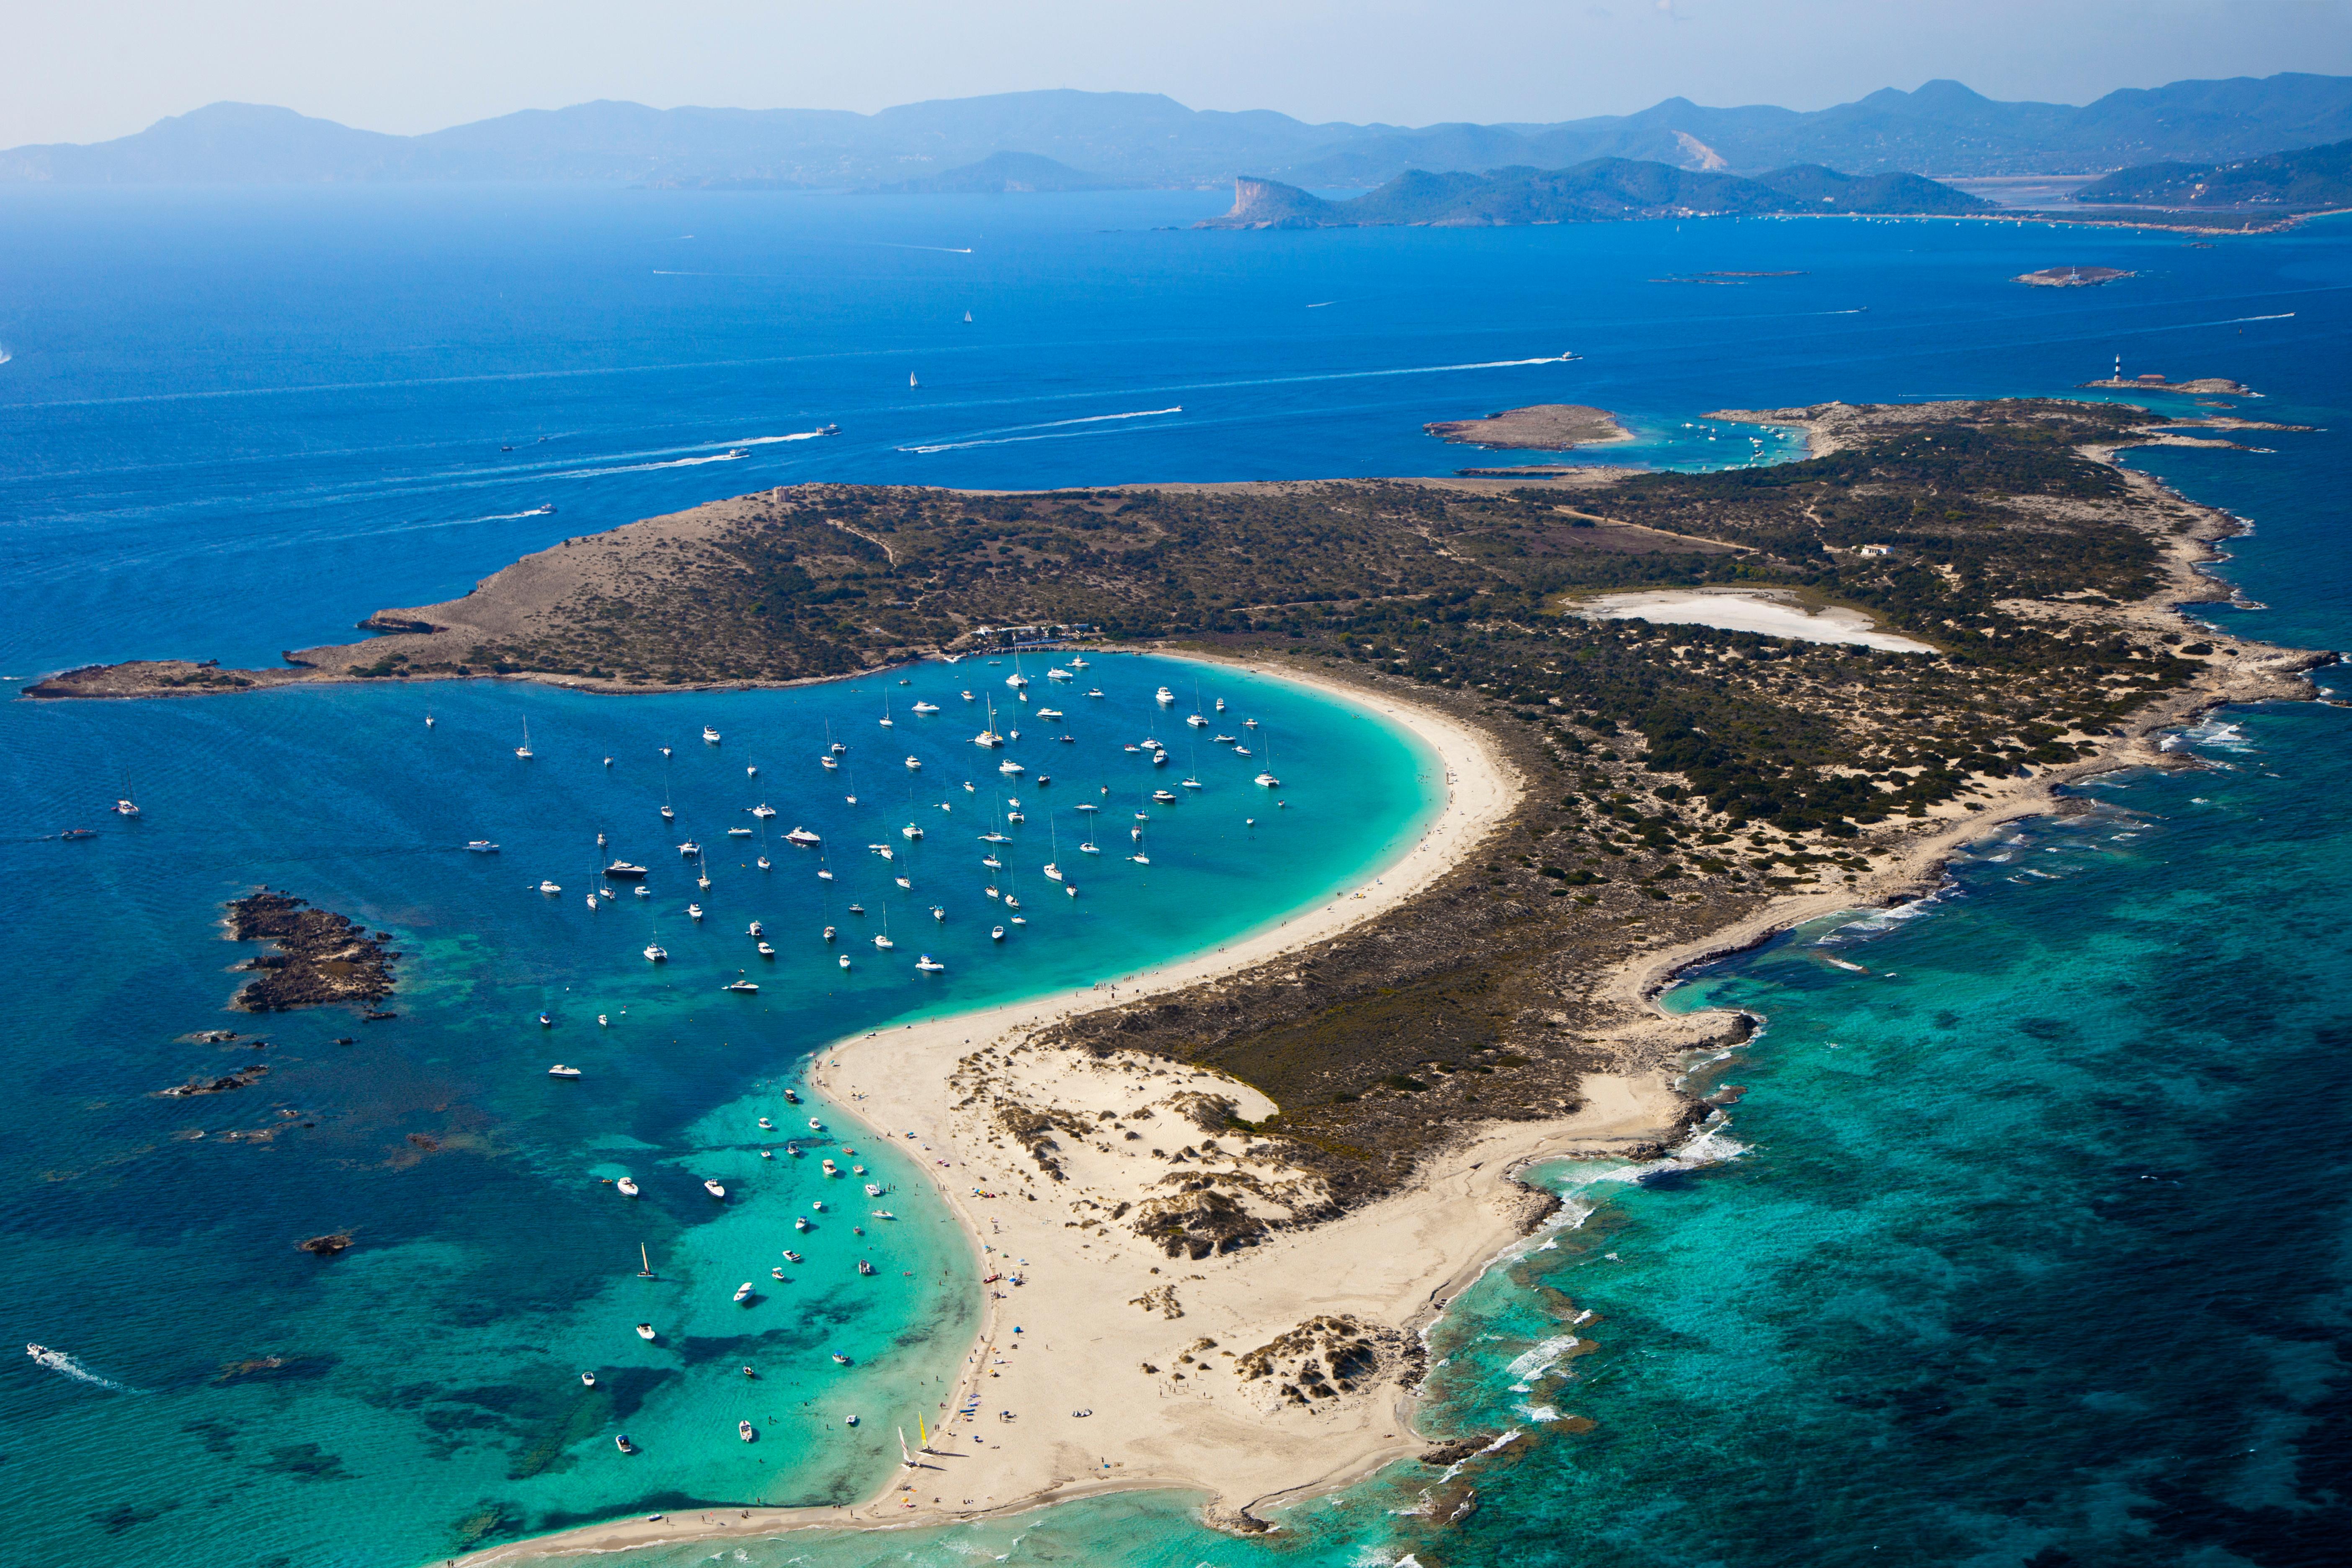 Formentera is trying to deal with an influx of tourists by limiting the amount of cars